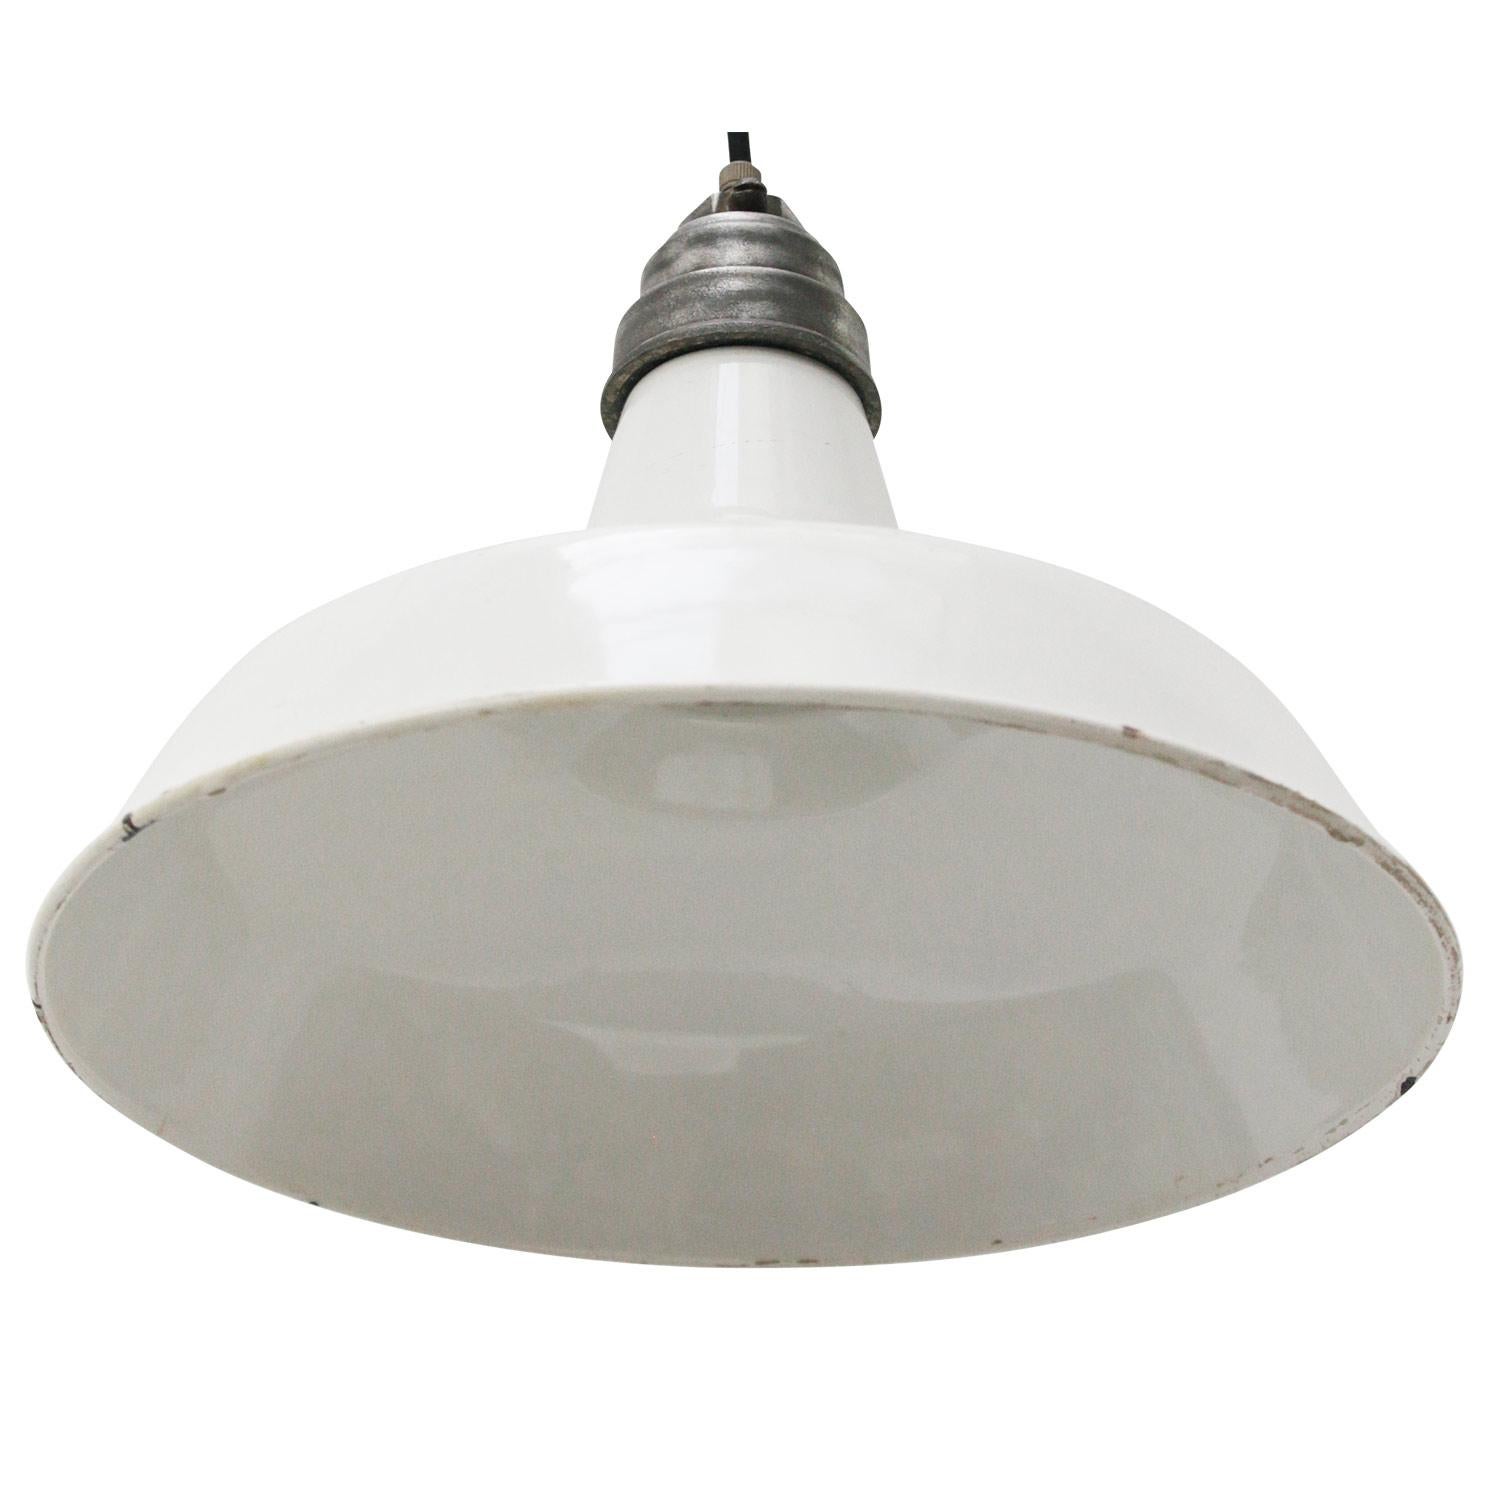 Factory American hanging lights. White enamel. White interior.

Weight 1.60 kg / 3.5 lb

Priced per individual item. All lamps have been made suitable by international standards for incandescent light bulbs, energy-efficient and LED bulbs.